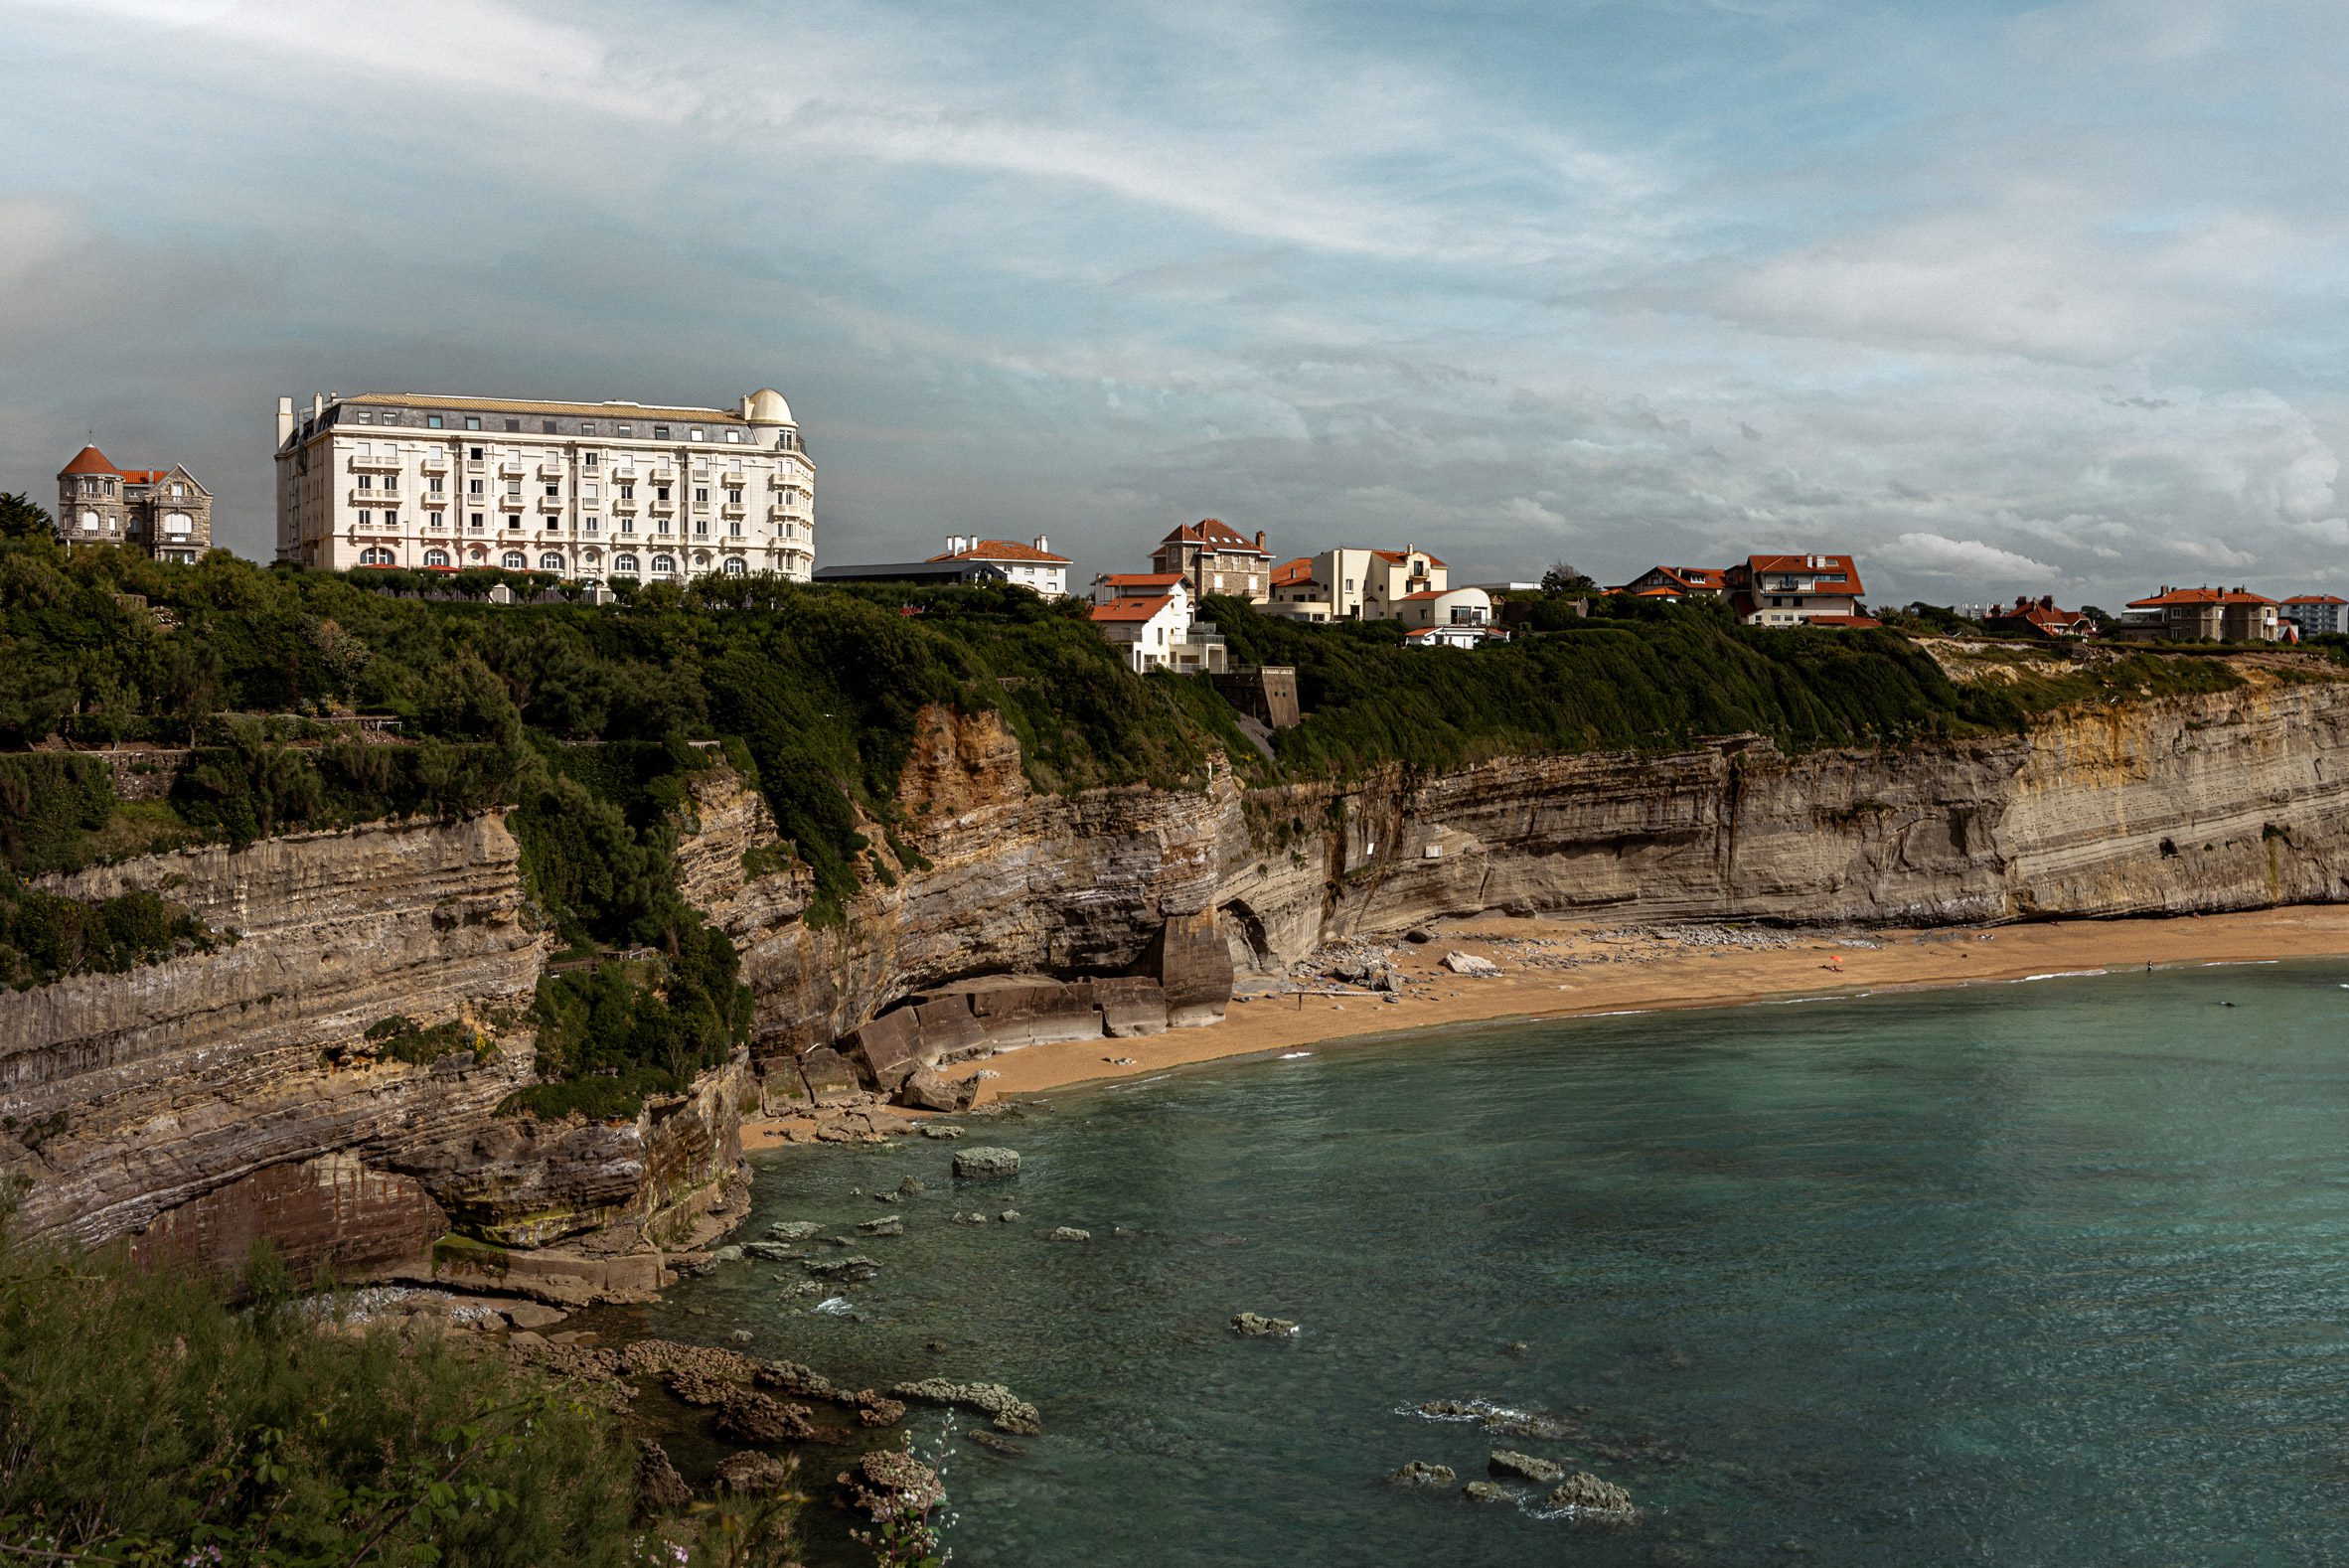 Hotel perched on a cliff overlooking the sea